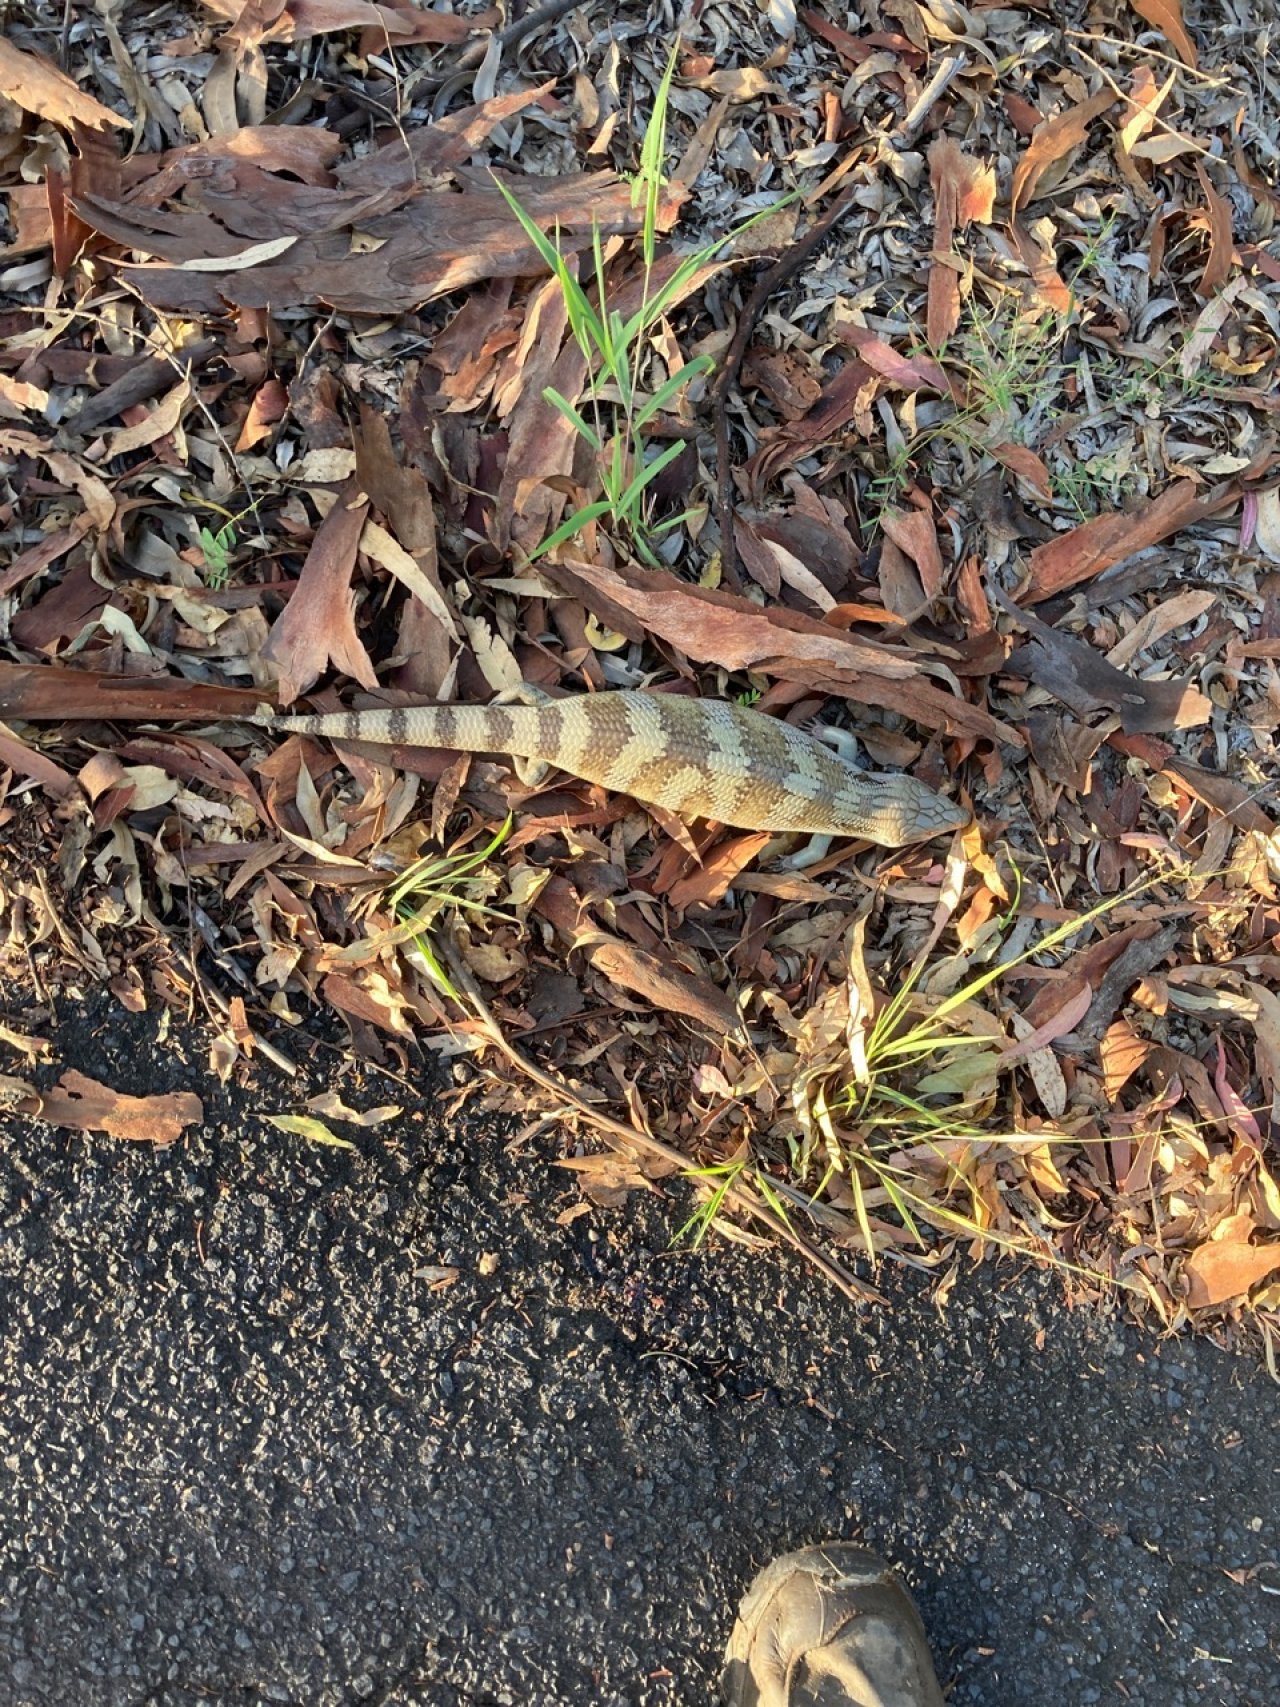 Anderes Reptil in Roadkill App spotted by Craig Sh on 07.02.2021